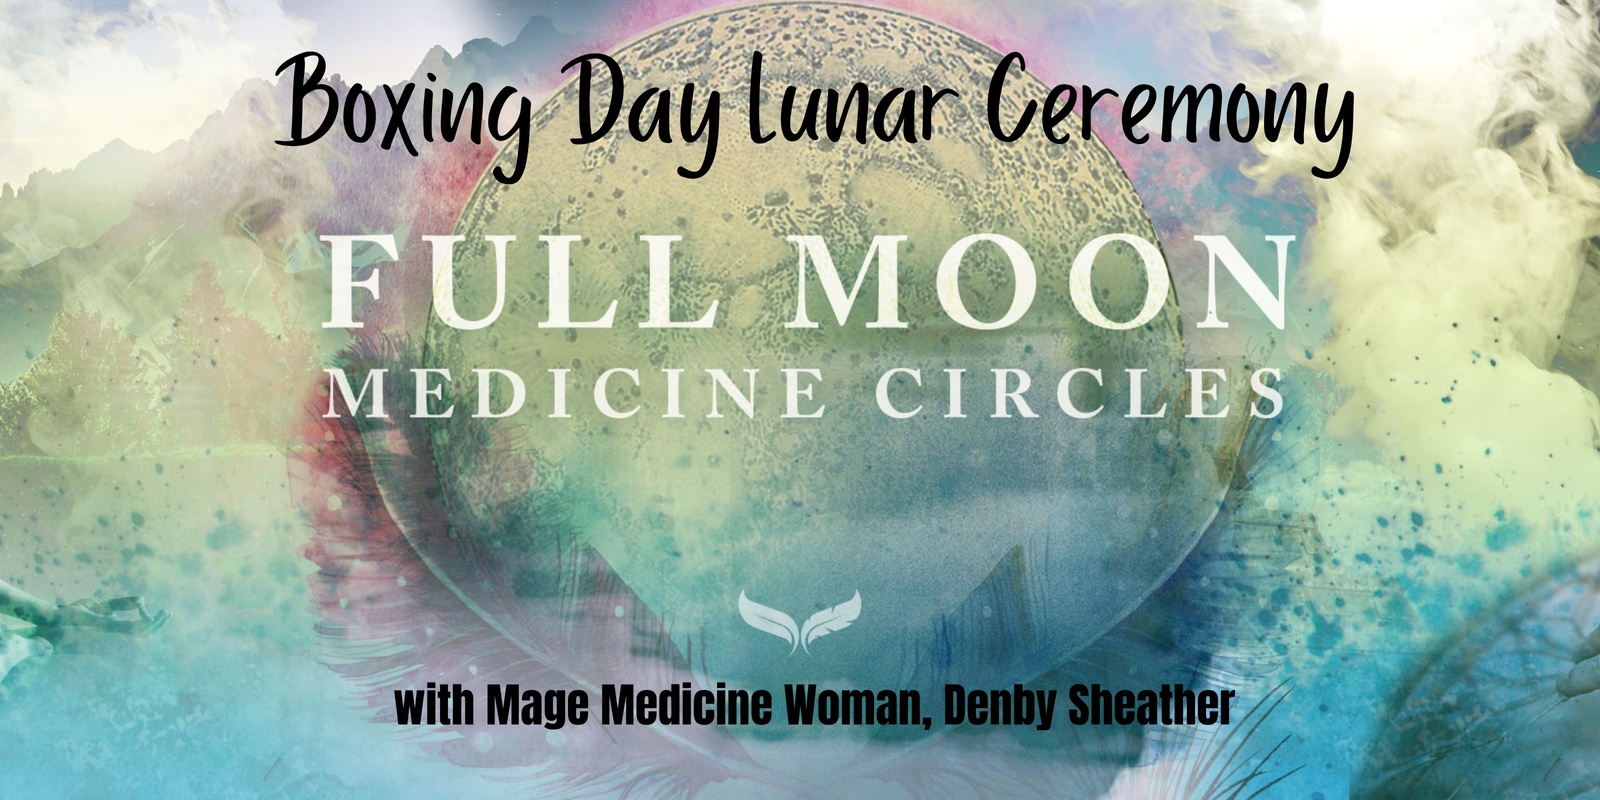 Banner image for Boxing Day Lunar Ceremony